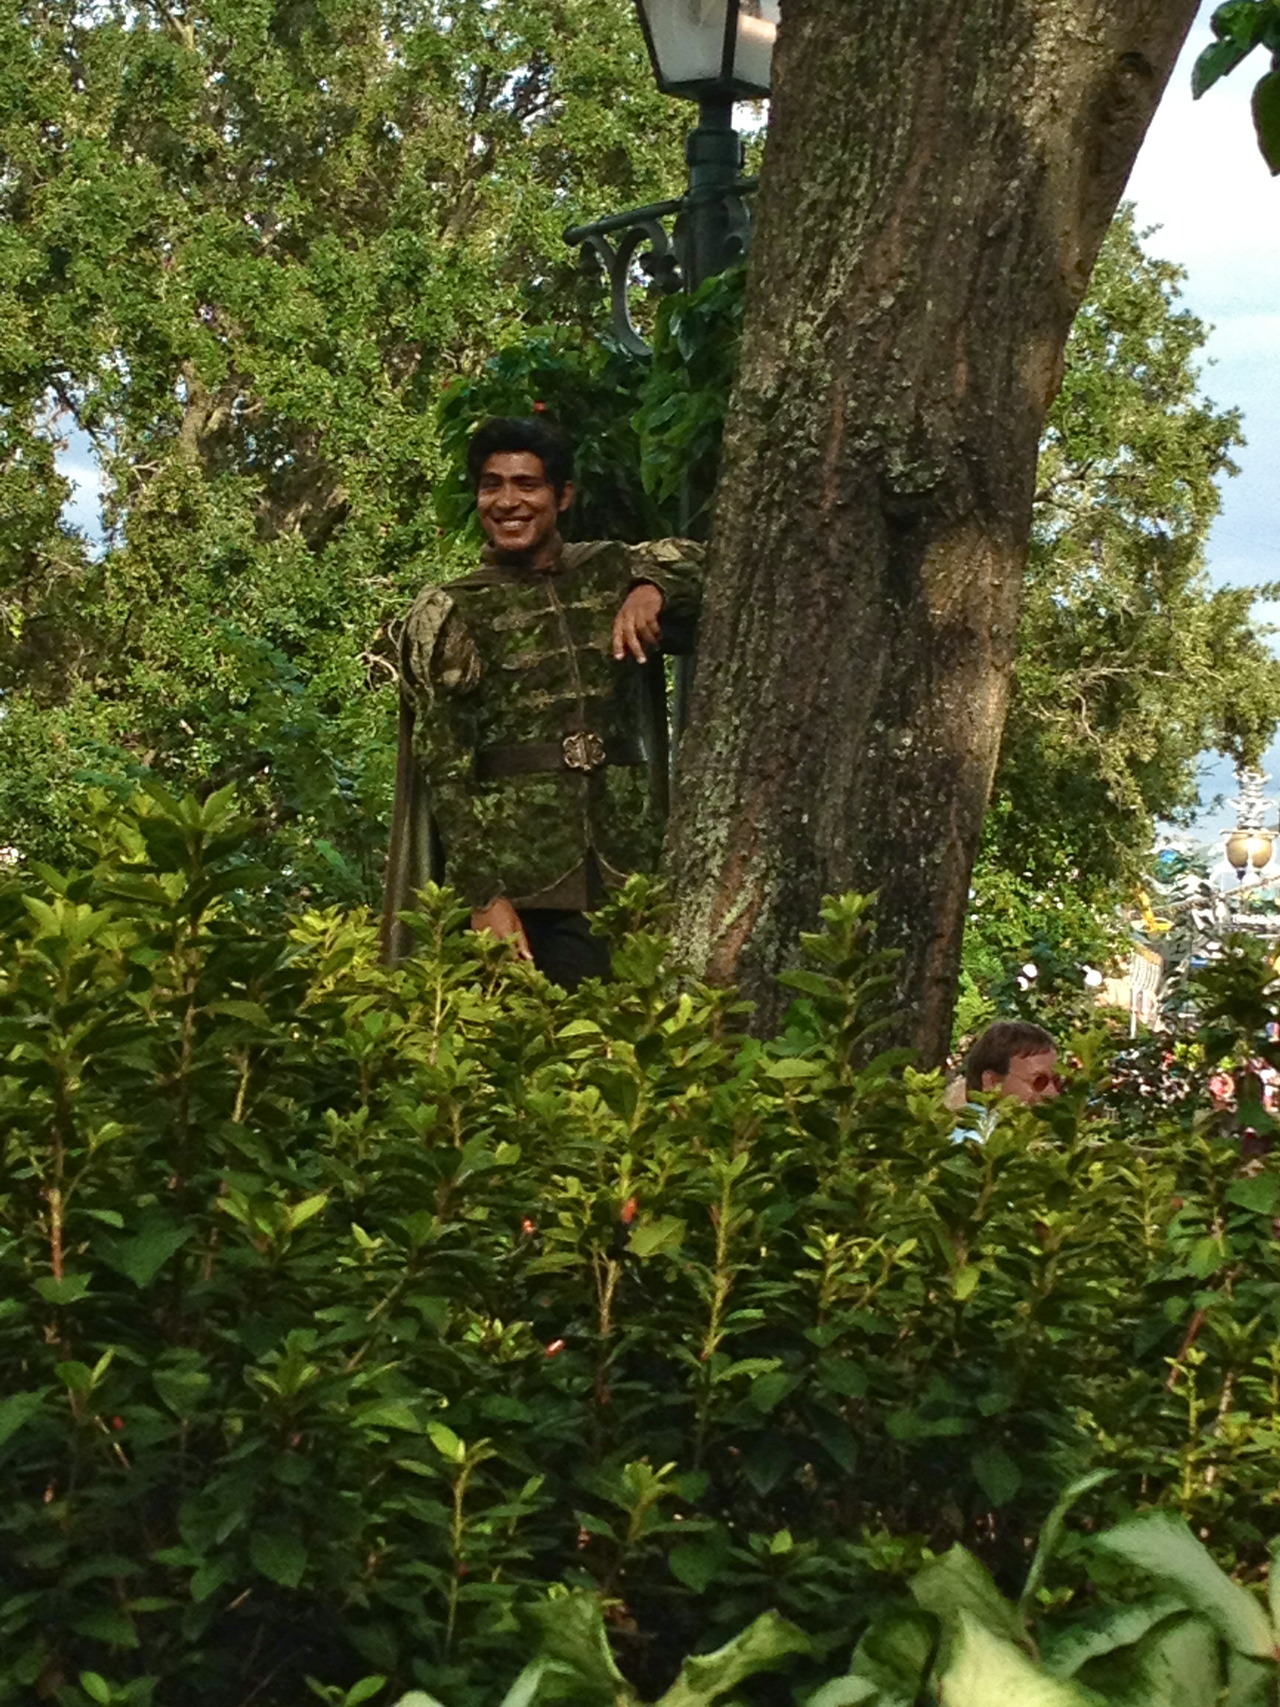 disney-pixar-magic-fanatic:
“ So this little girl at Magic Kingdom the other day was scared of Naveen and only wanted to meet Princess Tiana. So Prince Naveen decided that he was gonna hide in the bushes while Tiana brought the girl over to the...